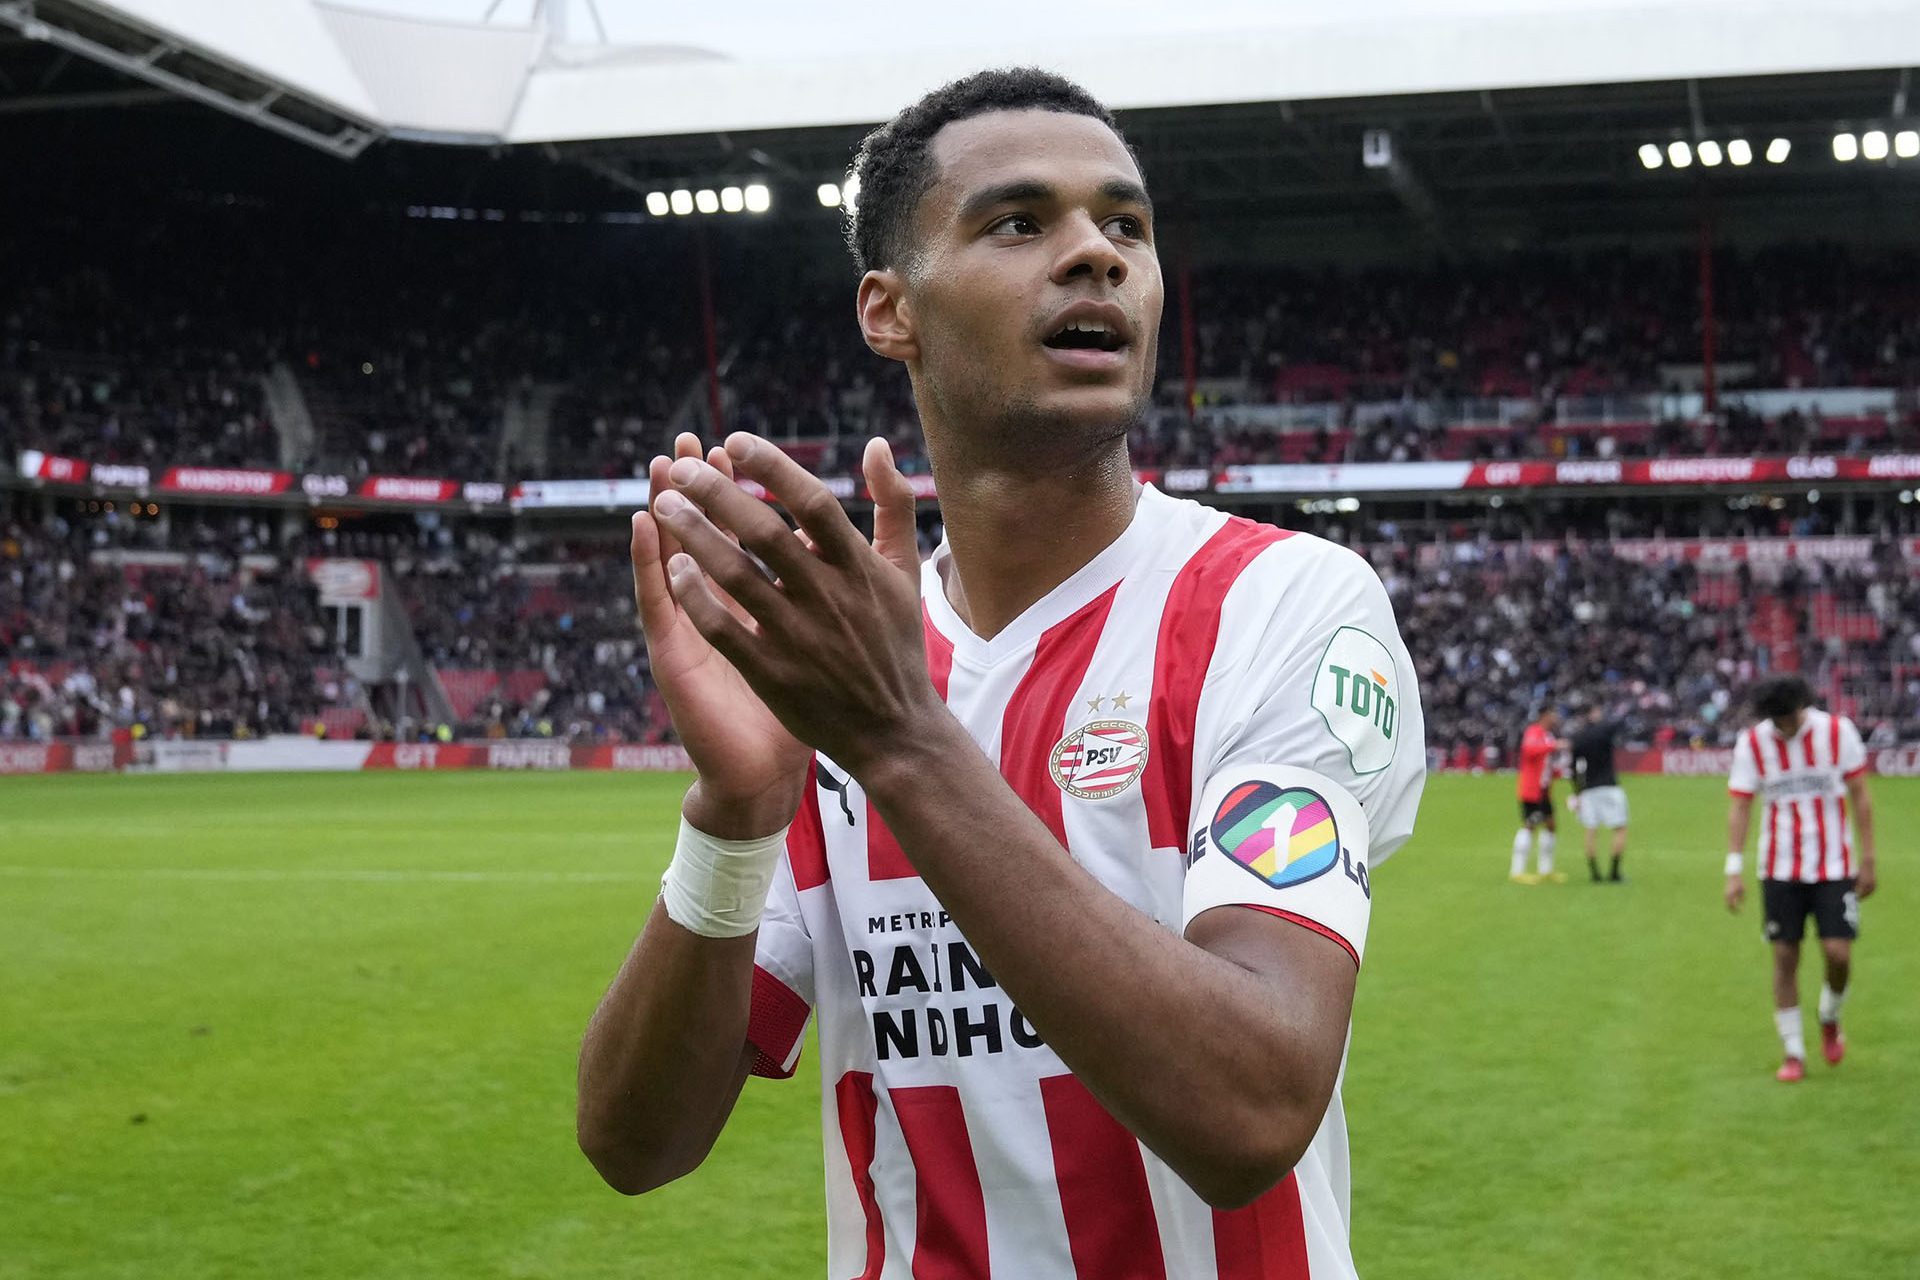 Six seasons with PSV Eindhoven